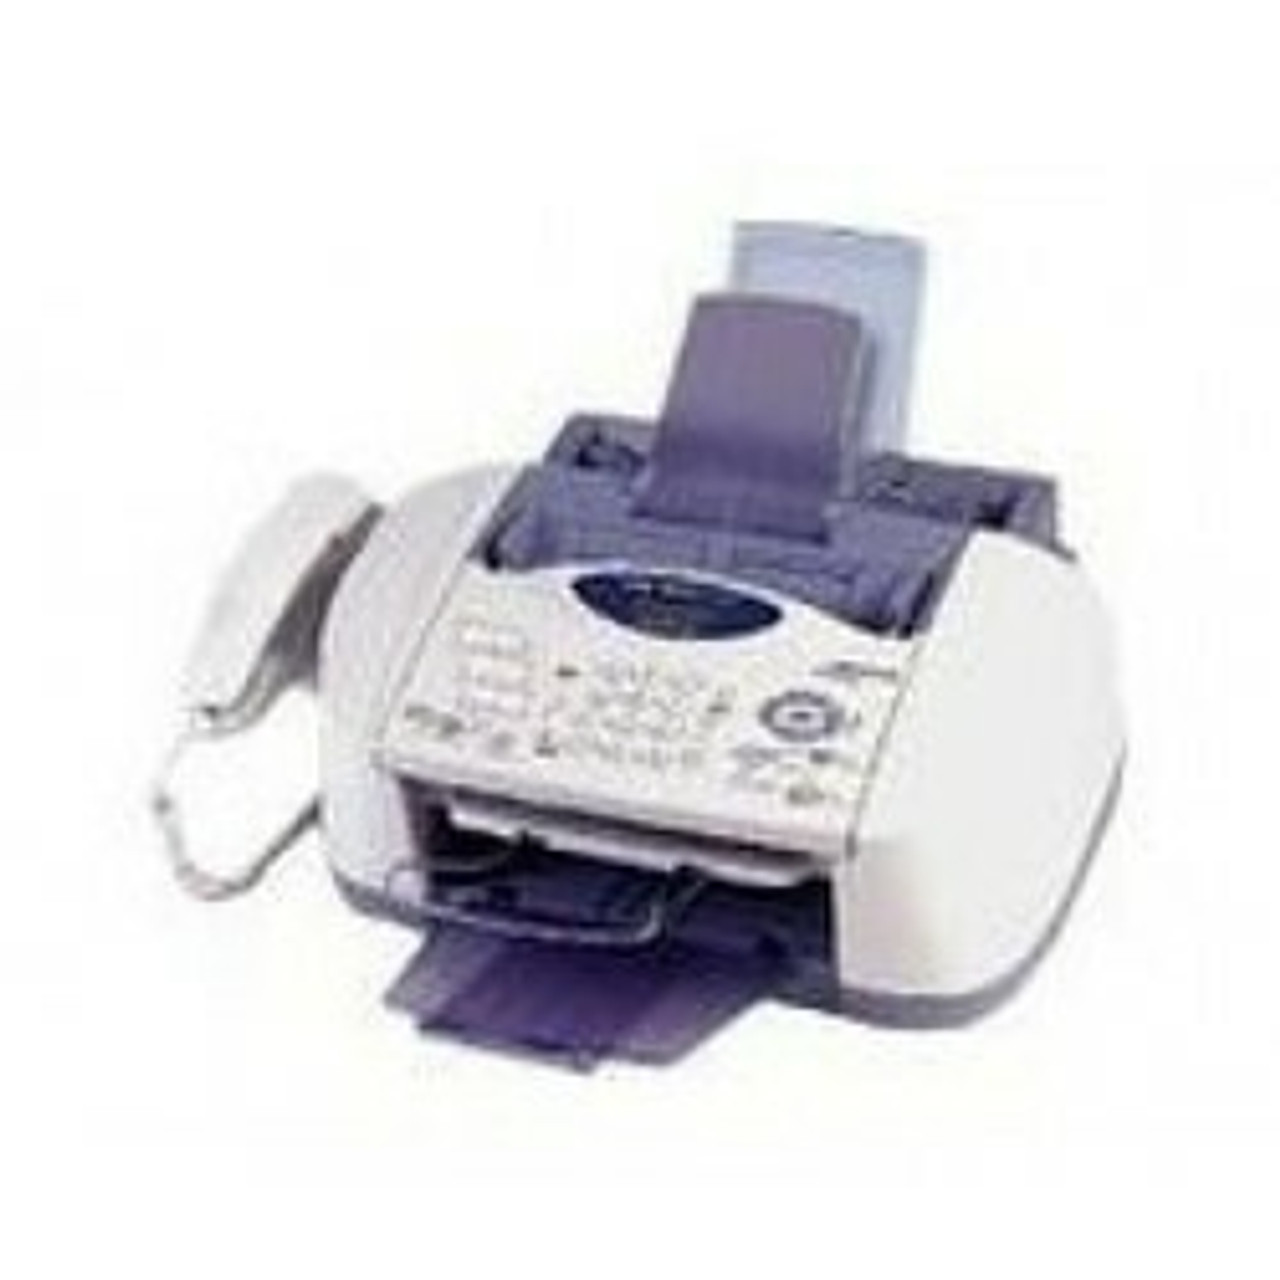 Brother Intellifax 1170